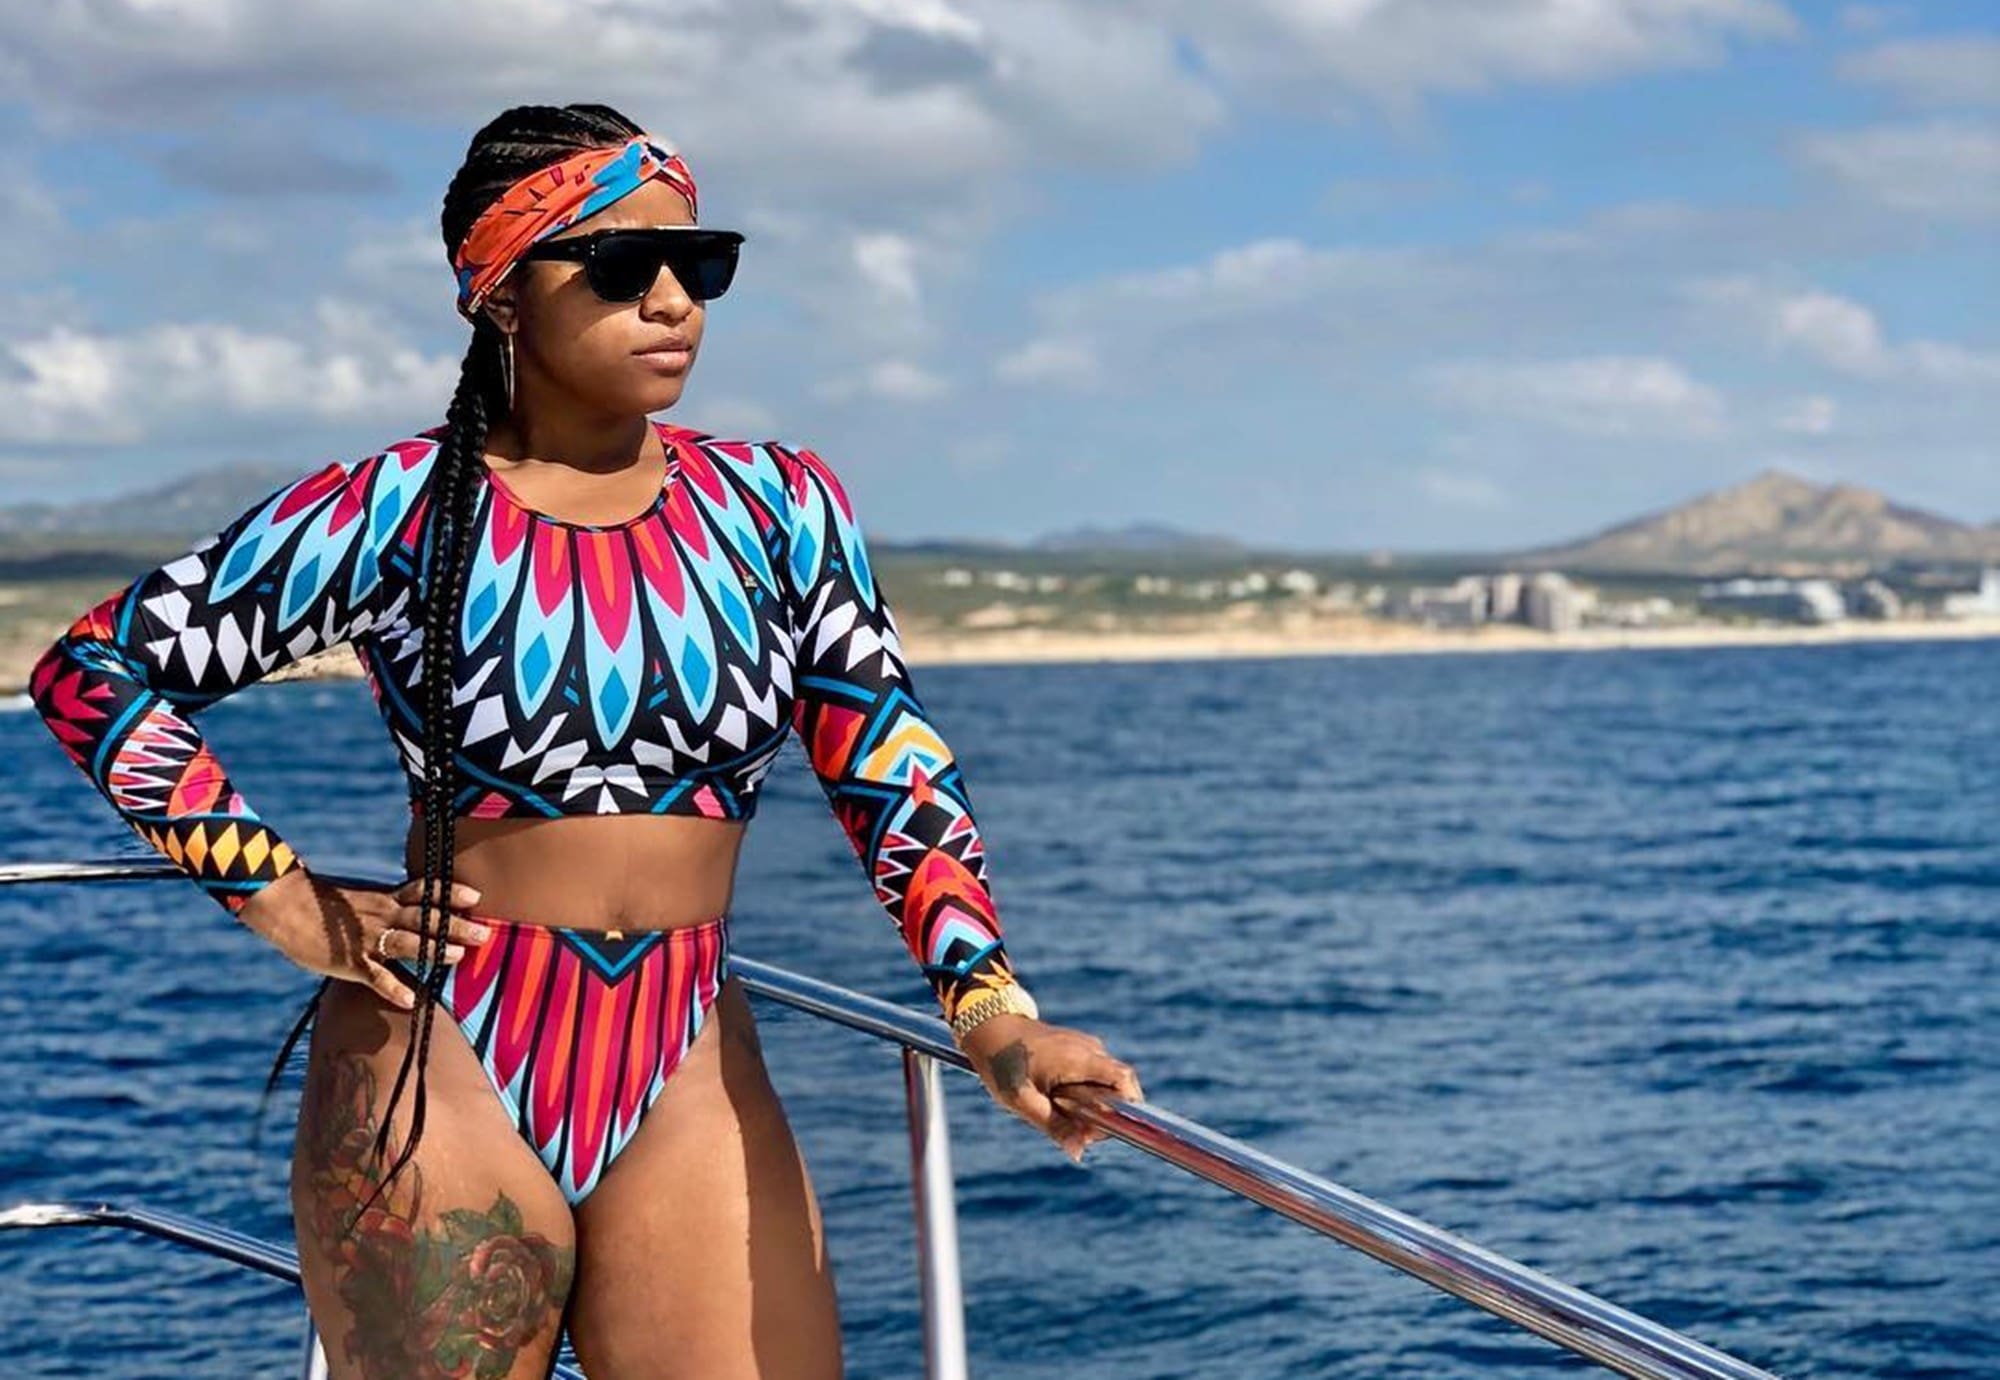 Toya Wright's Latest Pics With Reign Rushing On Vacay Are Gorgeous - Check Them Out Here